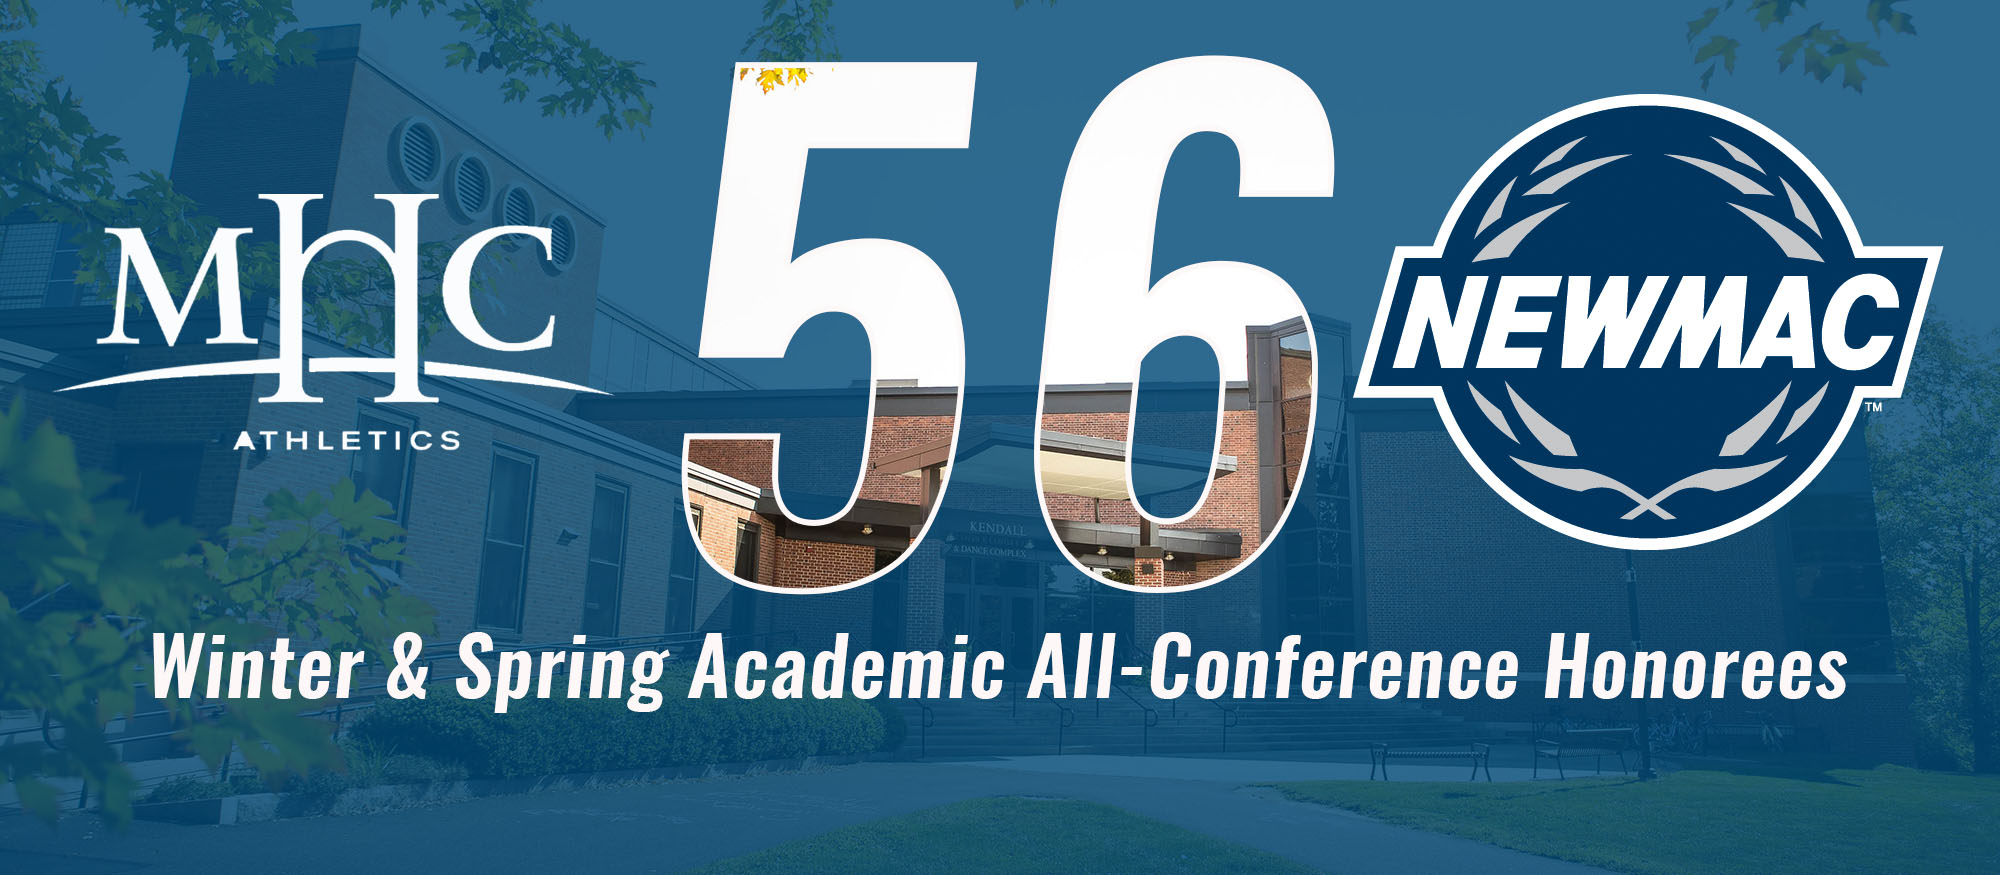 56 Winter and Spring Student-Athletes Earn NEWMAC Academic All-Conference Honors